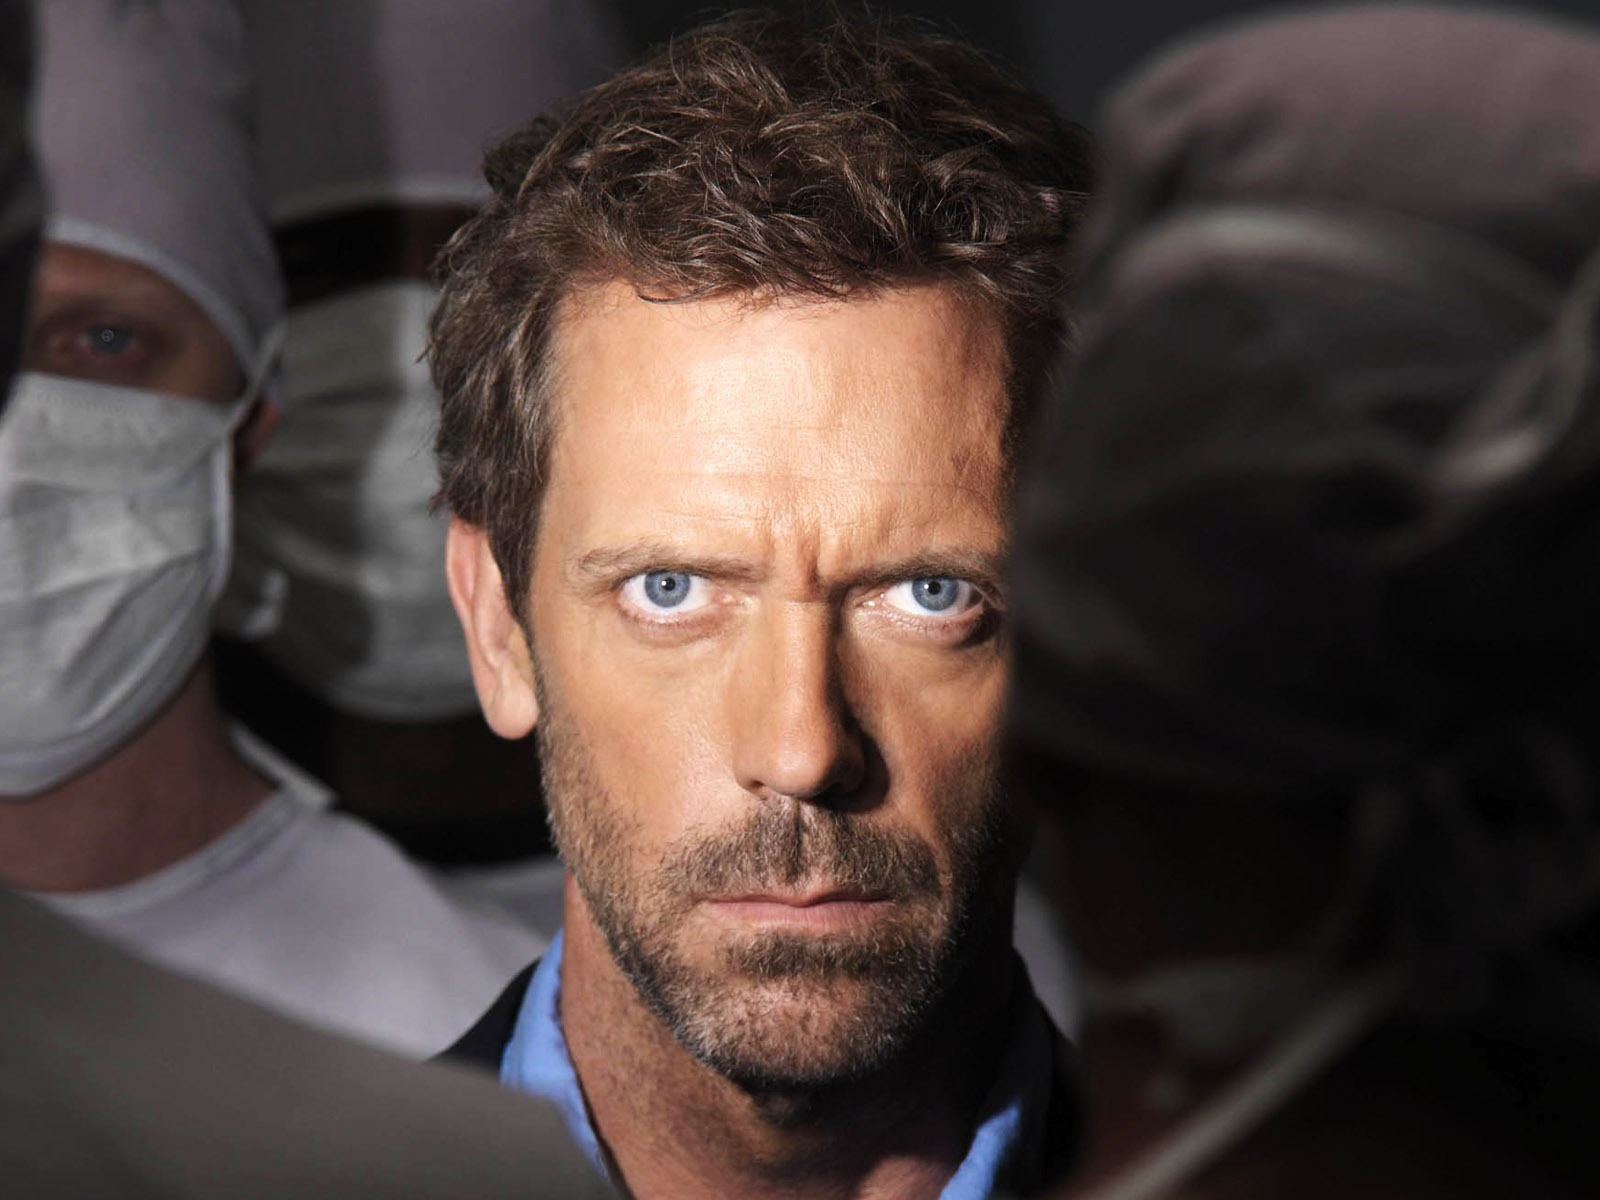 House M.D. HD Wallpapers #6 - 1600x1200